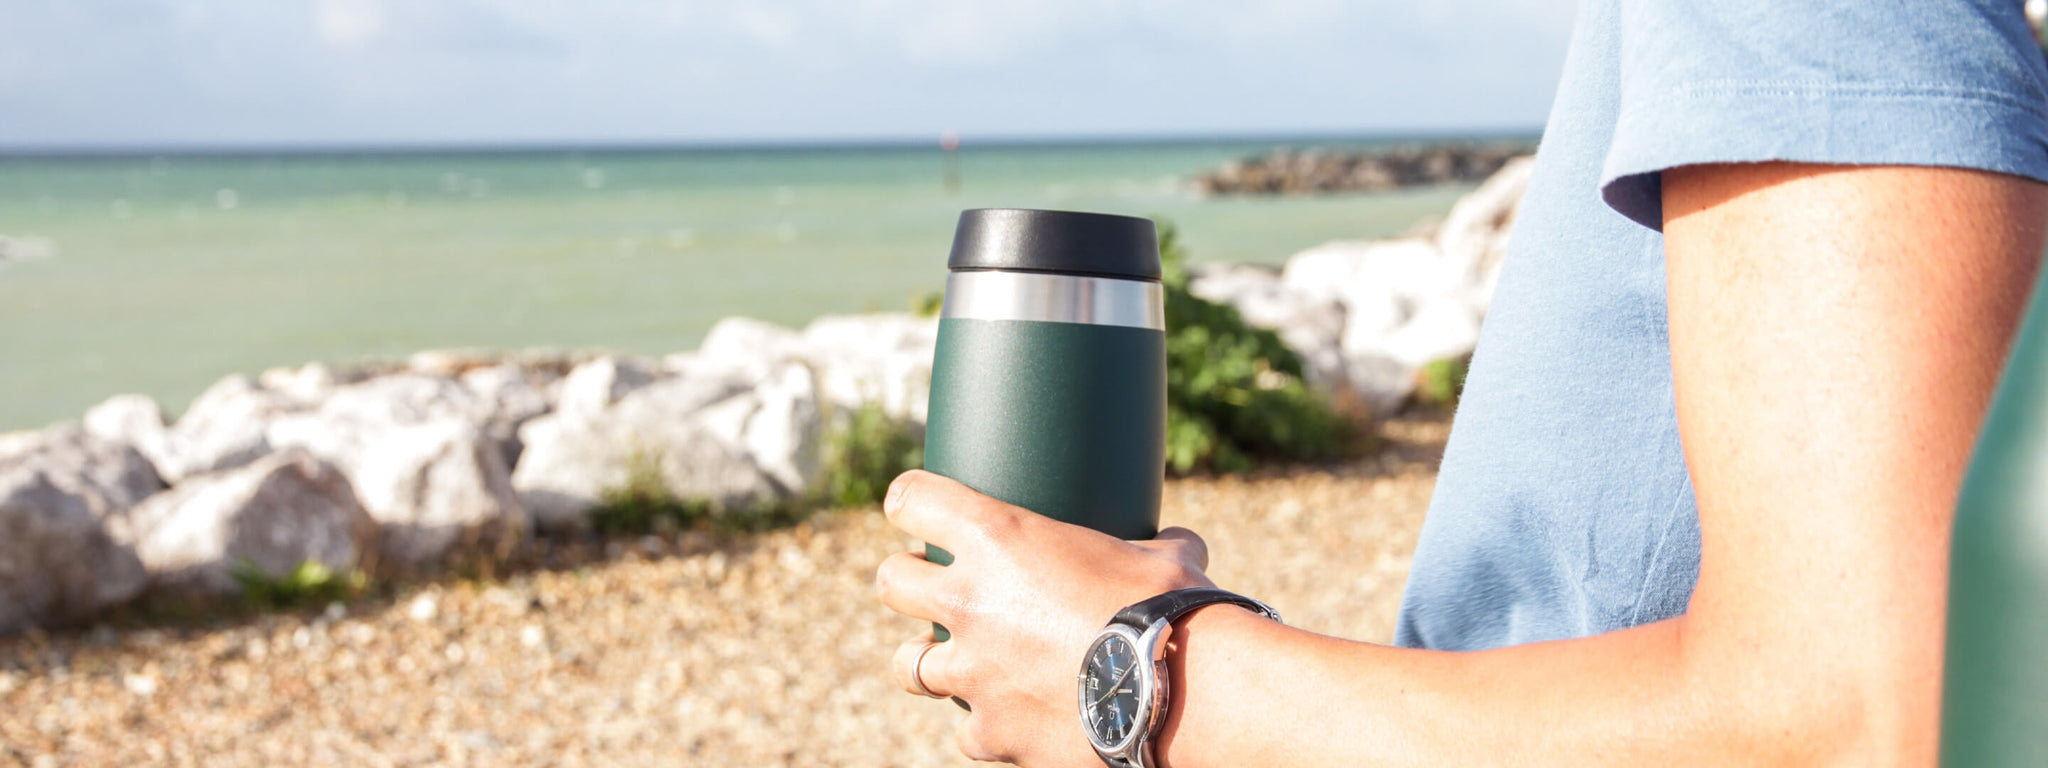 From Brew to Pew: Why does your reusable coffee cup smell so bad?